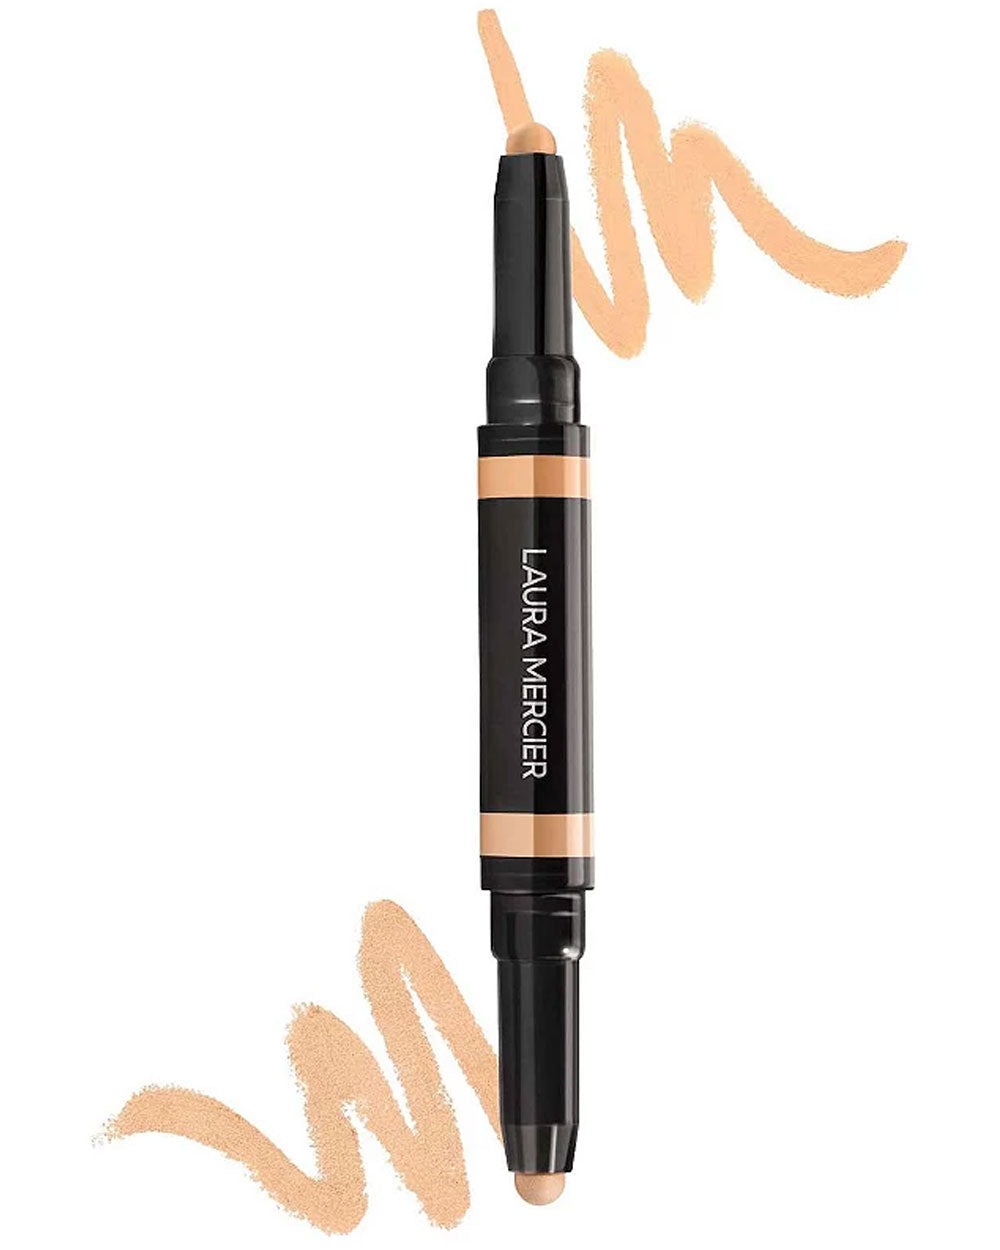 Secret Camouflage Correct and Brighten Concealer Duo Stick in 2W